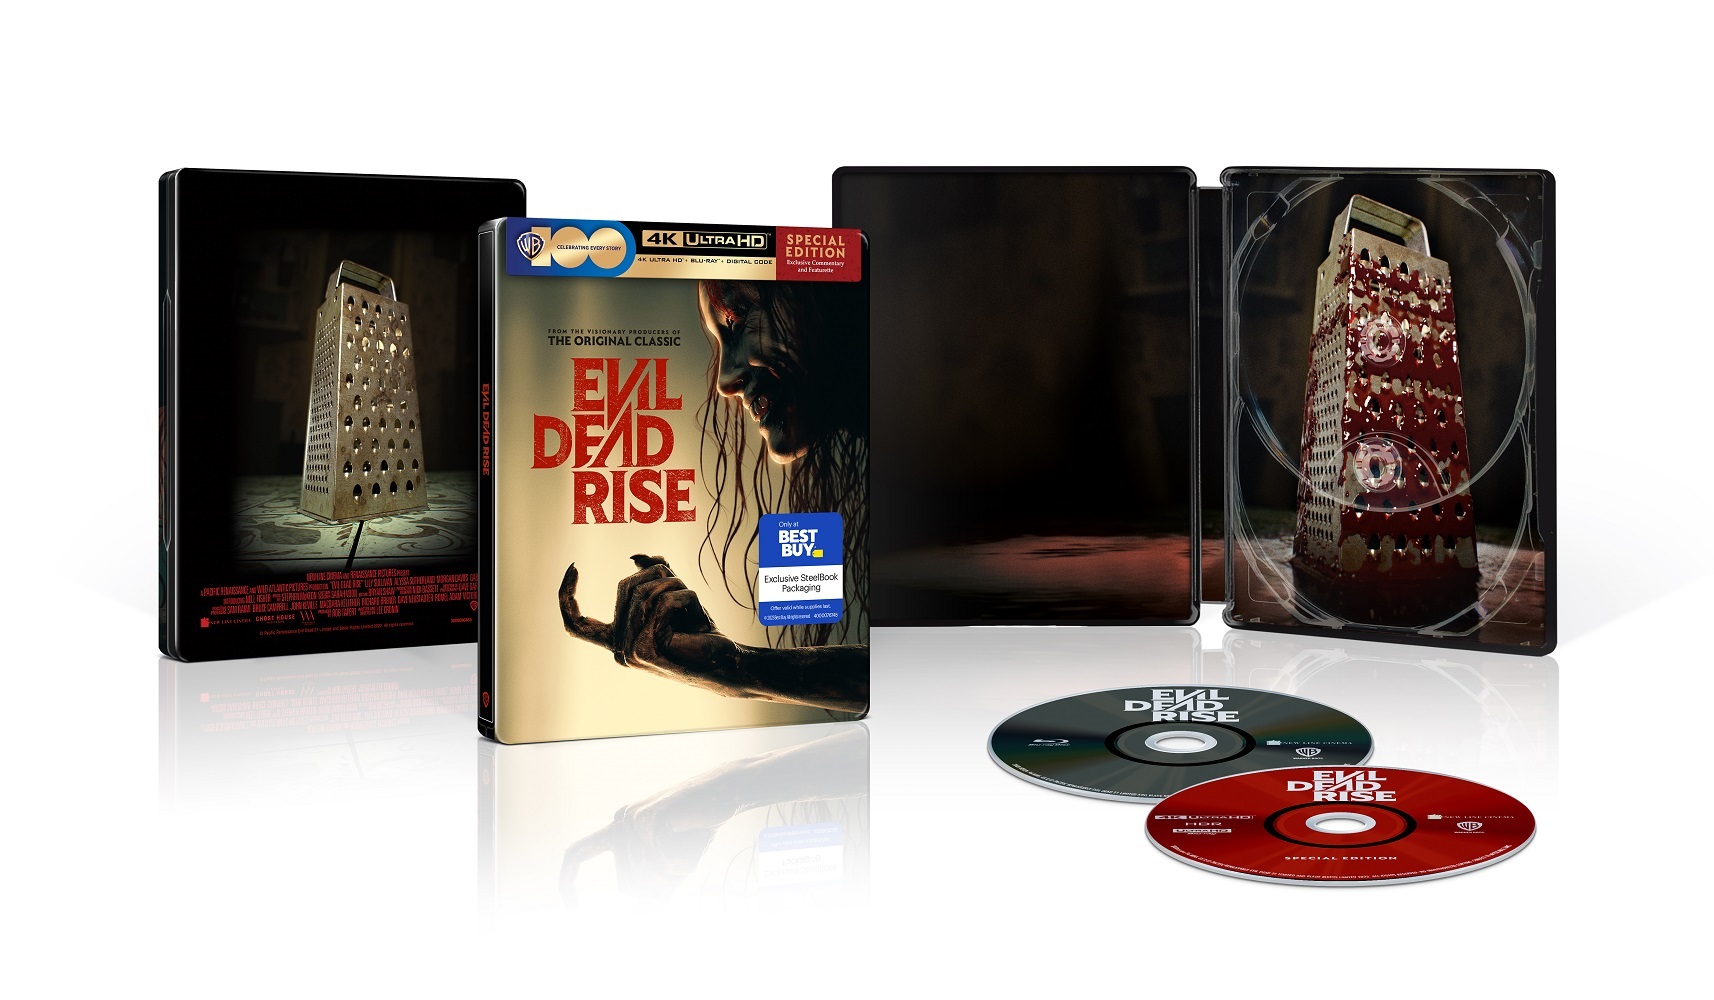 Evil Dead Rise Is the Franchise's Highest Rated Film